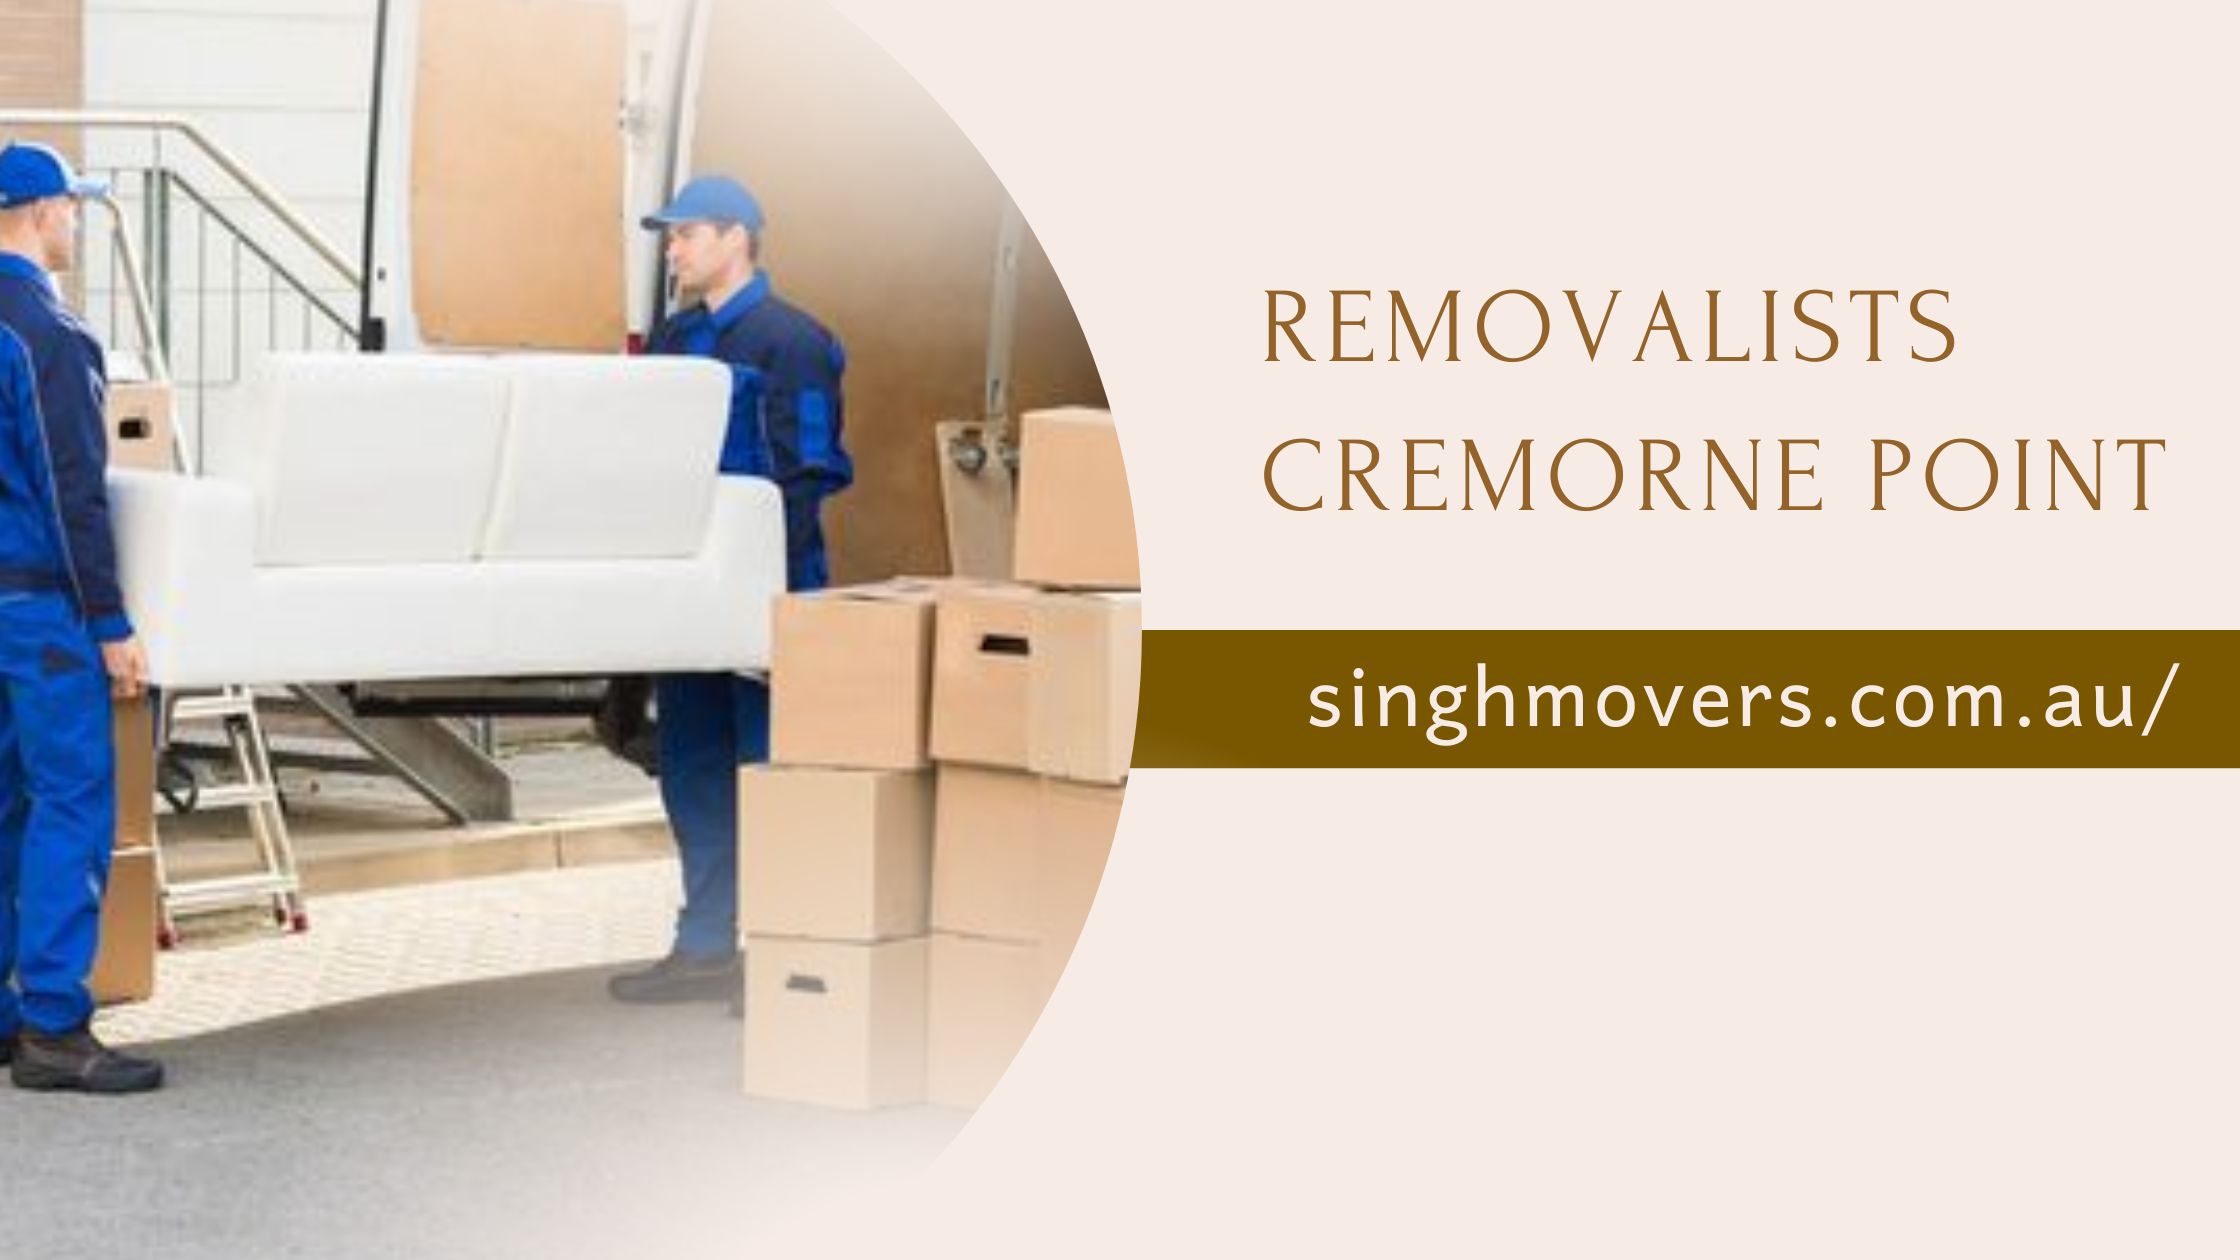 Removalists Cremorne Point